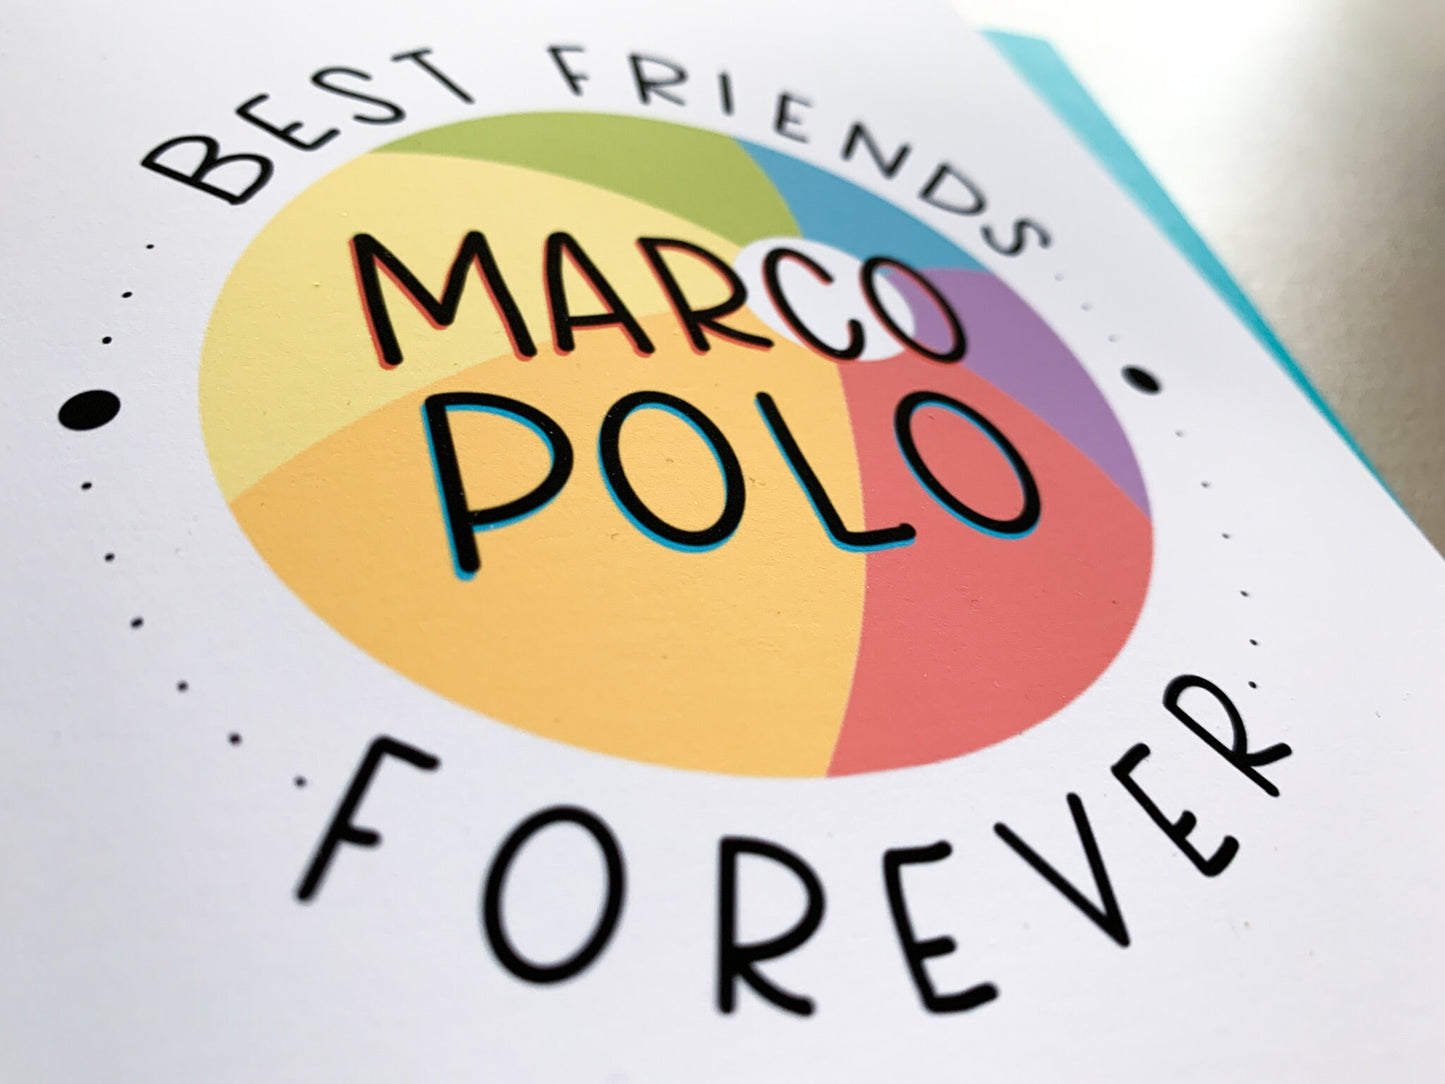 Best Friend Marco Polo Card by StoneDonut Design